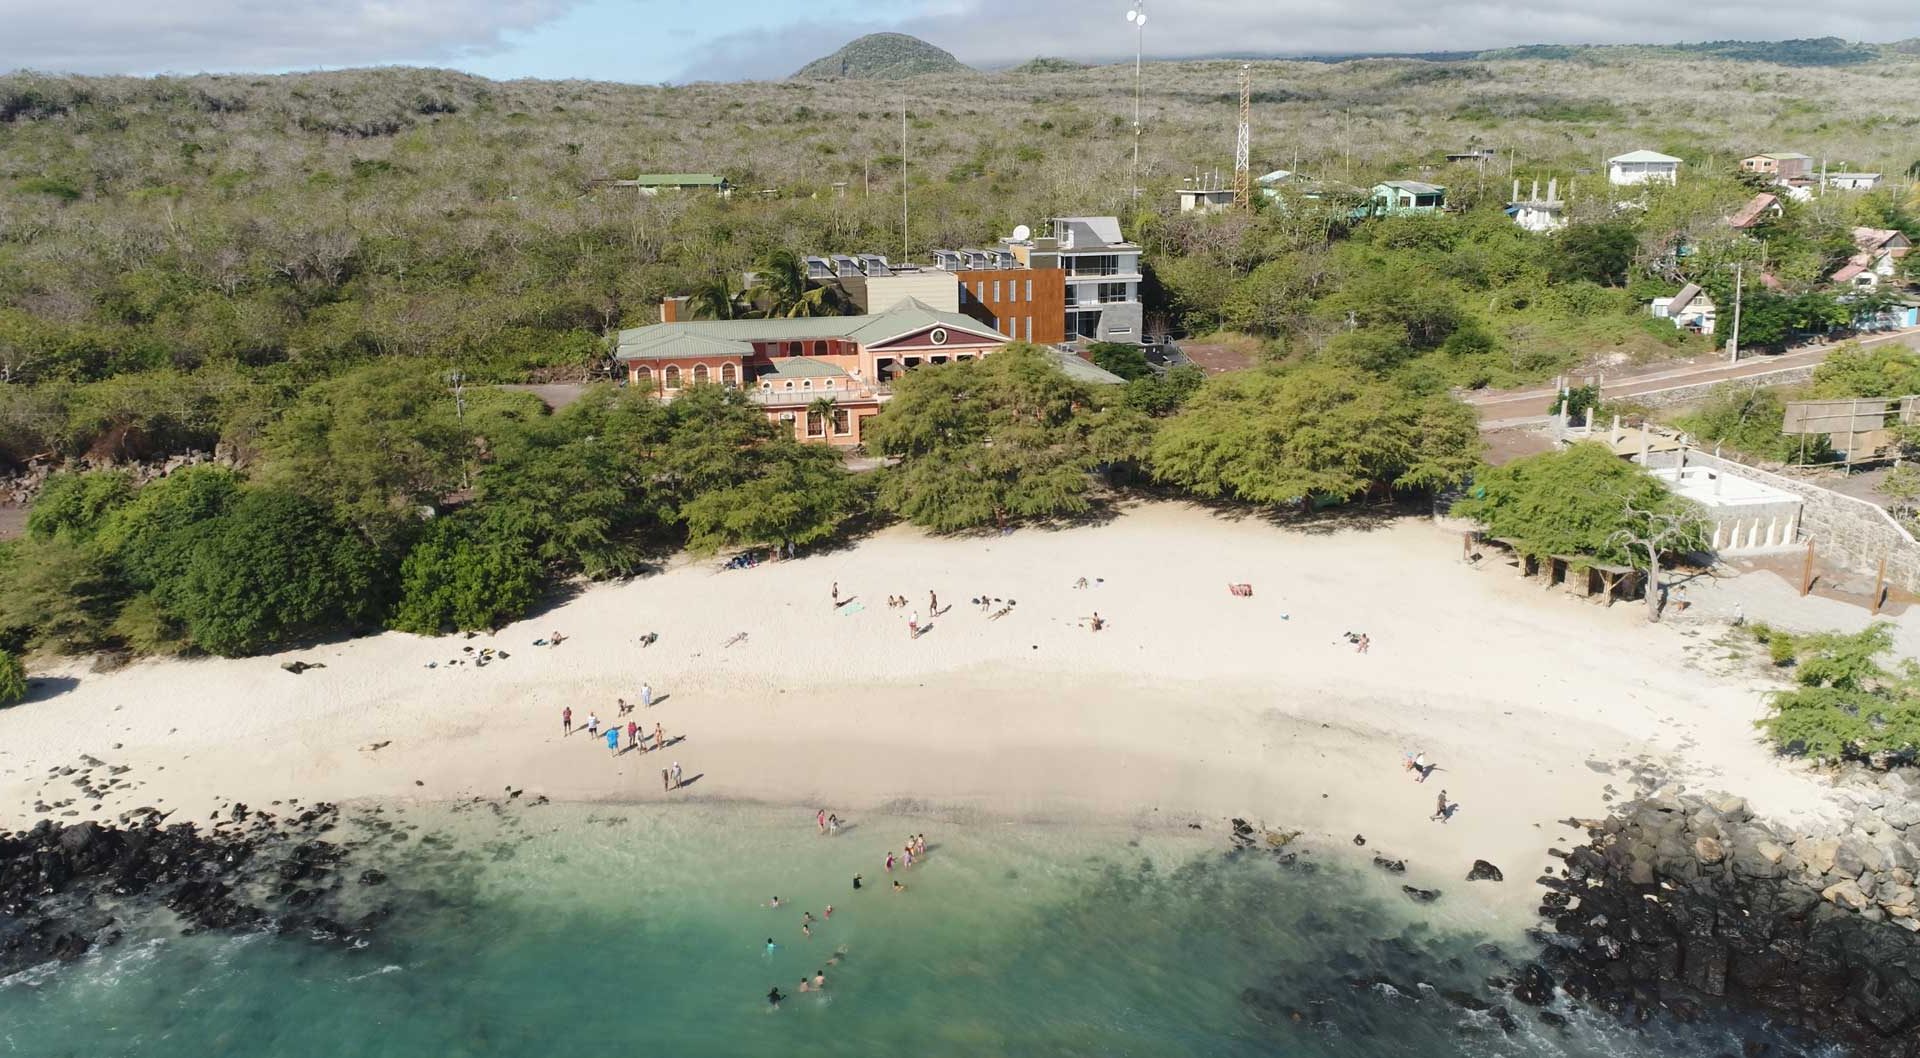 An overview shot of the Galapagos Science Center in the Galapagos Islands.